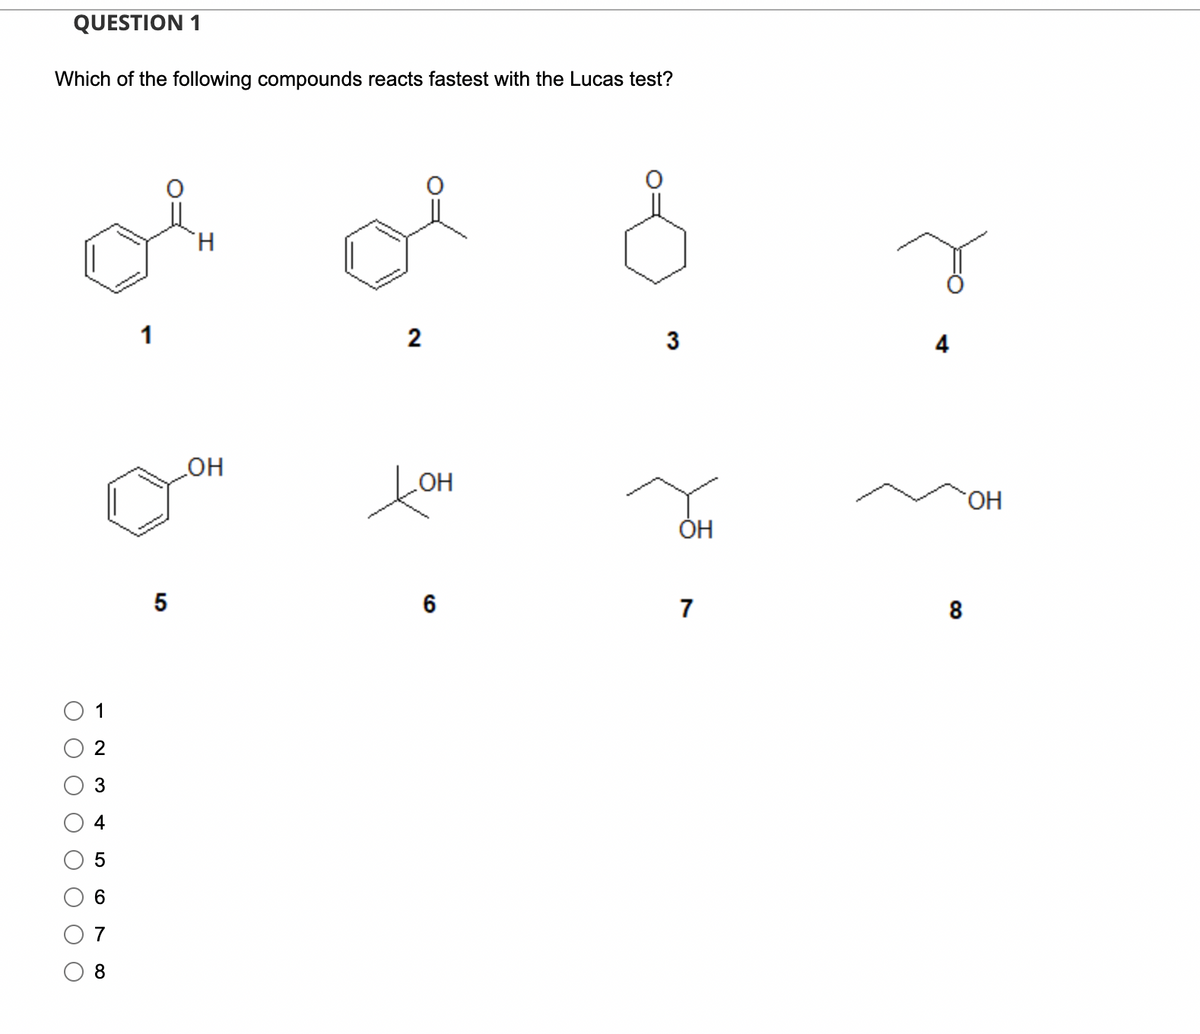 QUESTION 1
Which of the following compounds reacts fastest with the Lucas test?
1
O
1
7
8
00
H
2
3
4
OH
.OH
OH
OH
5
6
7
8